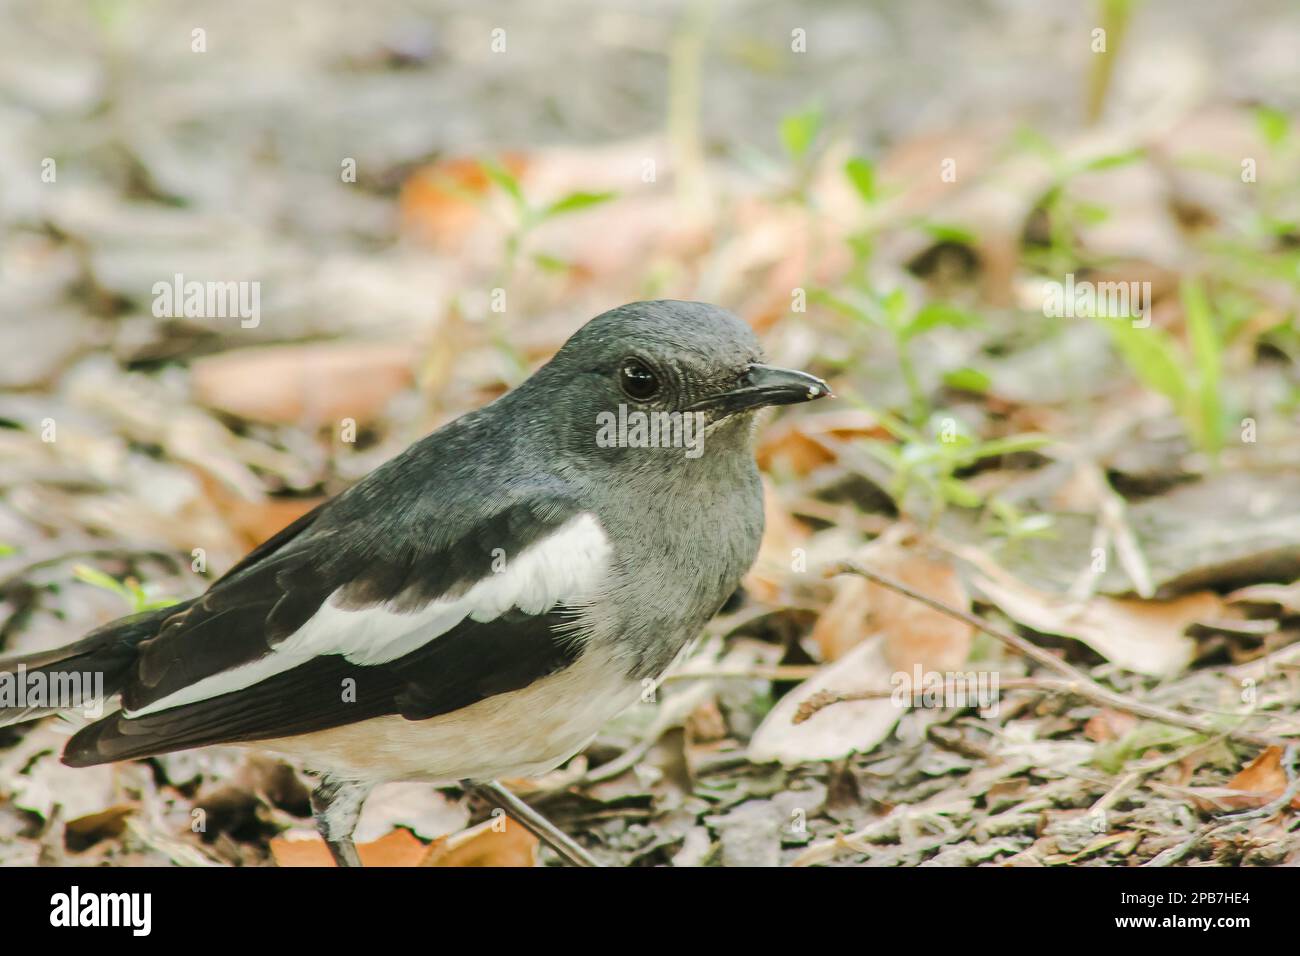 Oriental magpie robin is on the ground, Oriental magpie robin is a small black bird. Oriental magpie robin is a small insectivorous bird. Stock Photo